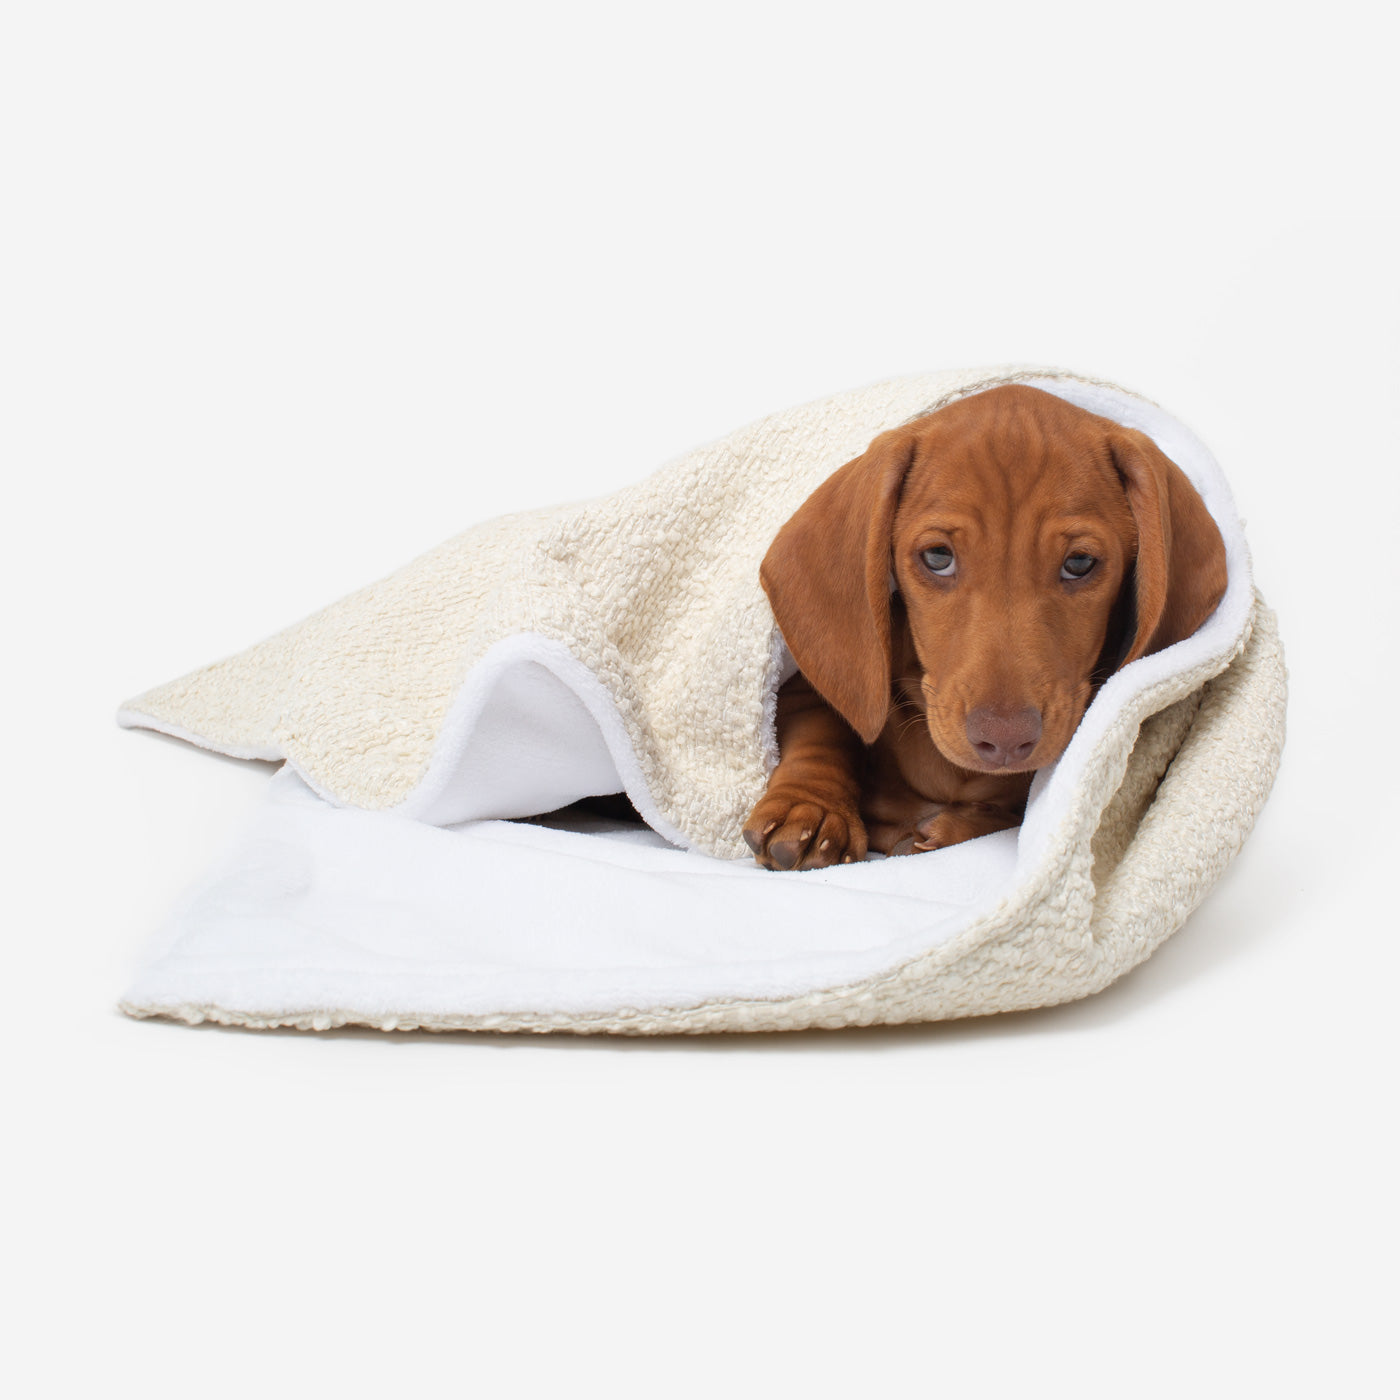 Discover Our Luxurious Dog Blanket In Luxury Ivory Bouclé Super Soft Sherpa & Teddy Fleece Lining, The Perfect Blanket For Puppies, Available To Personalize And In 2 Sizes Here at Lords & Labradors US